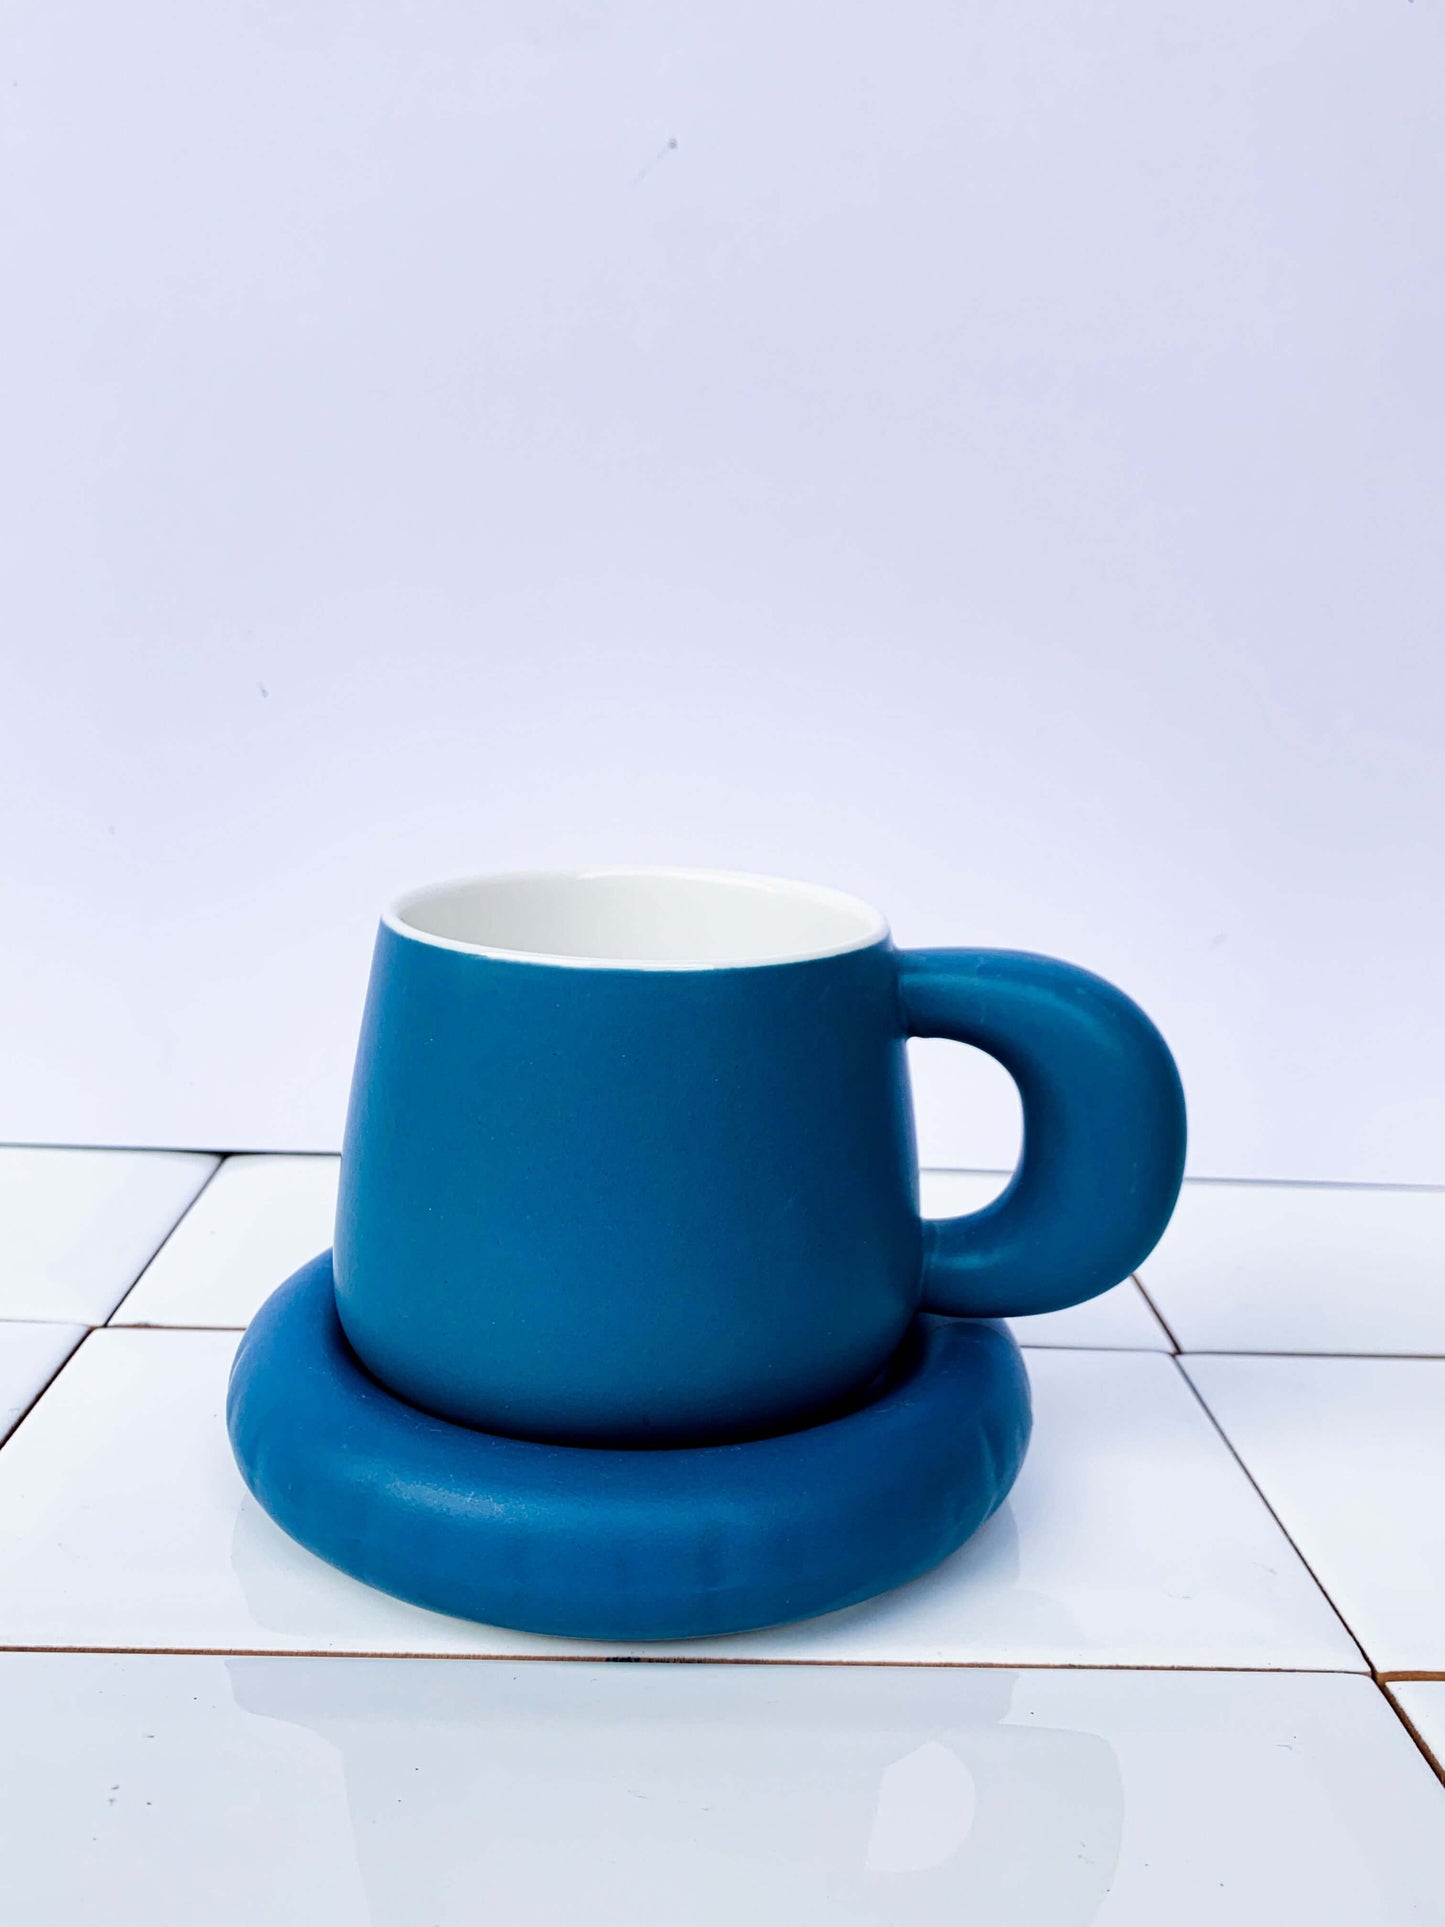 Dusk blue ceramic coffee cup and saucer